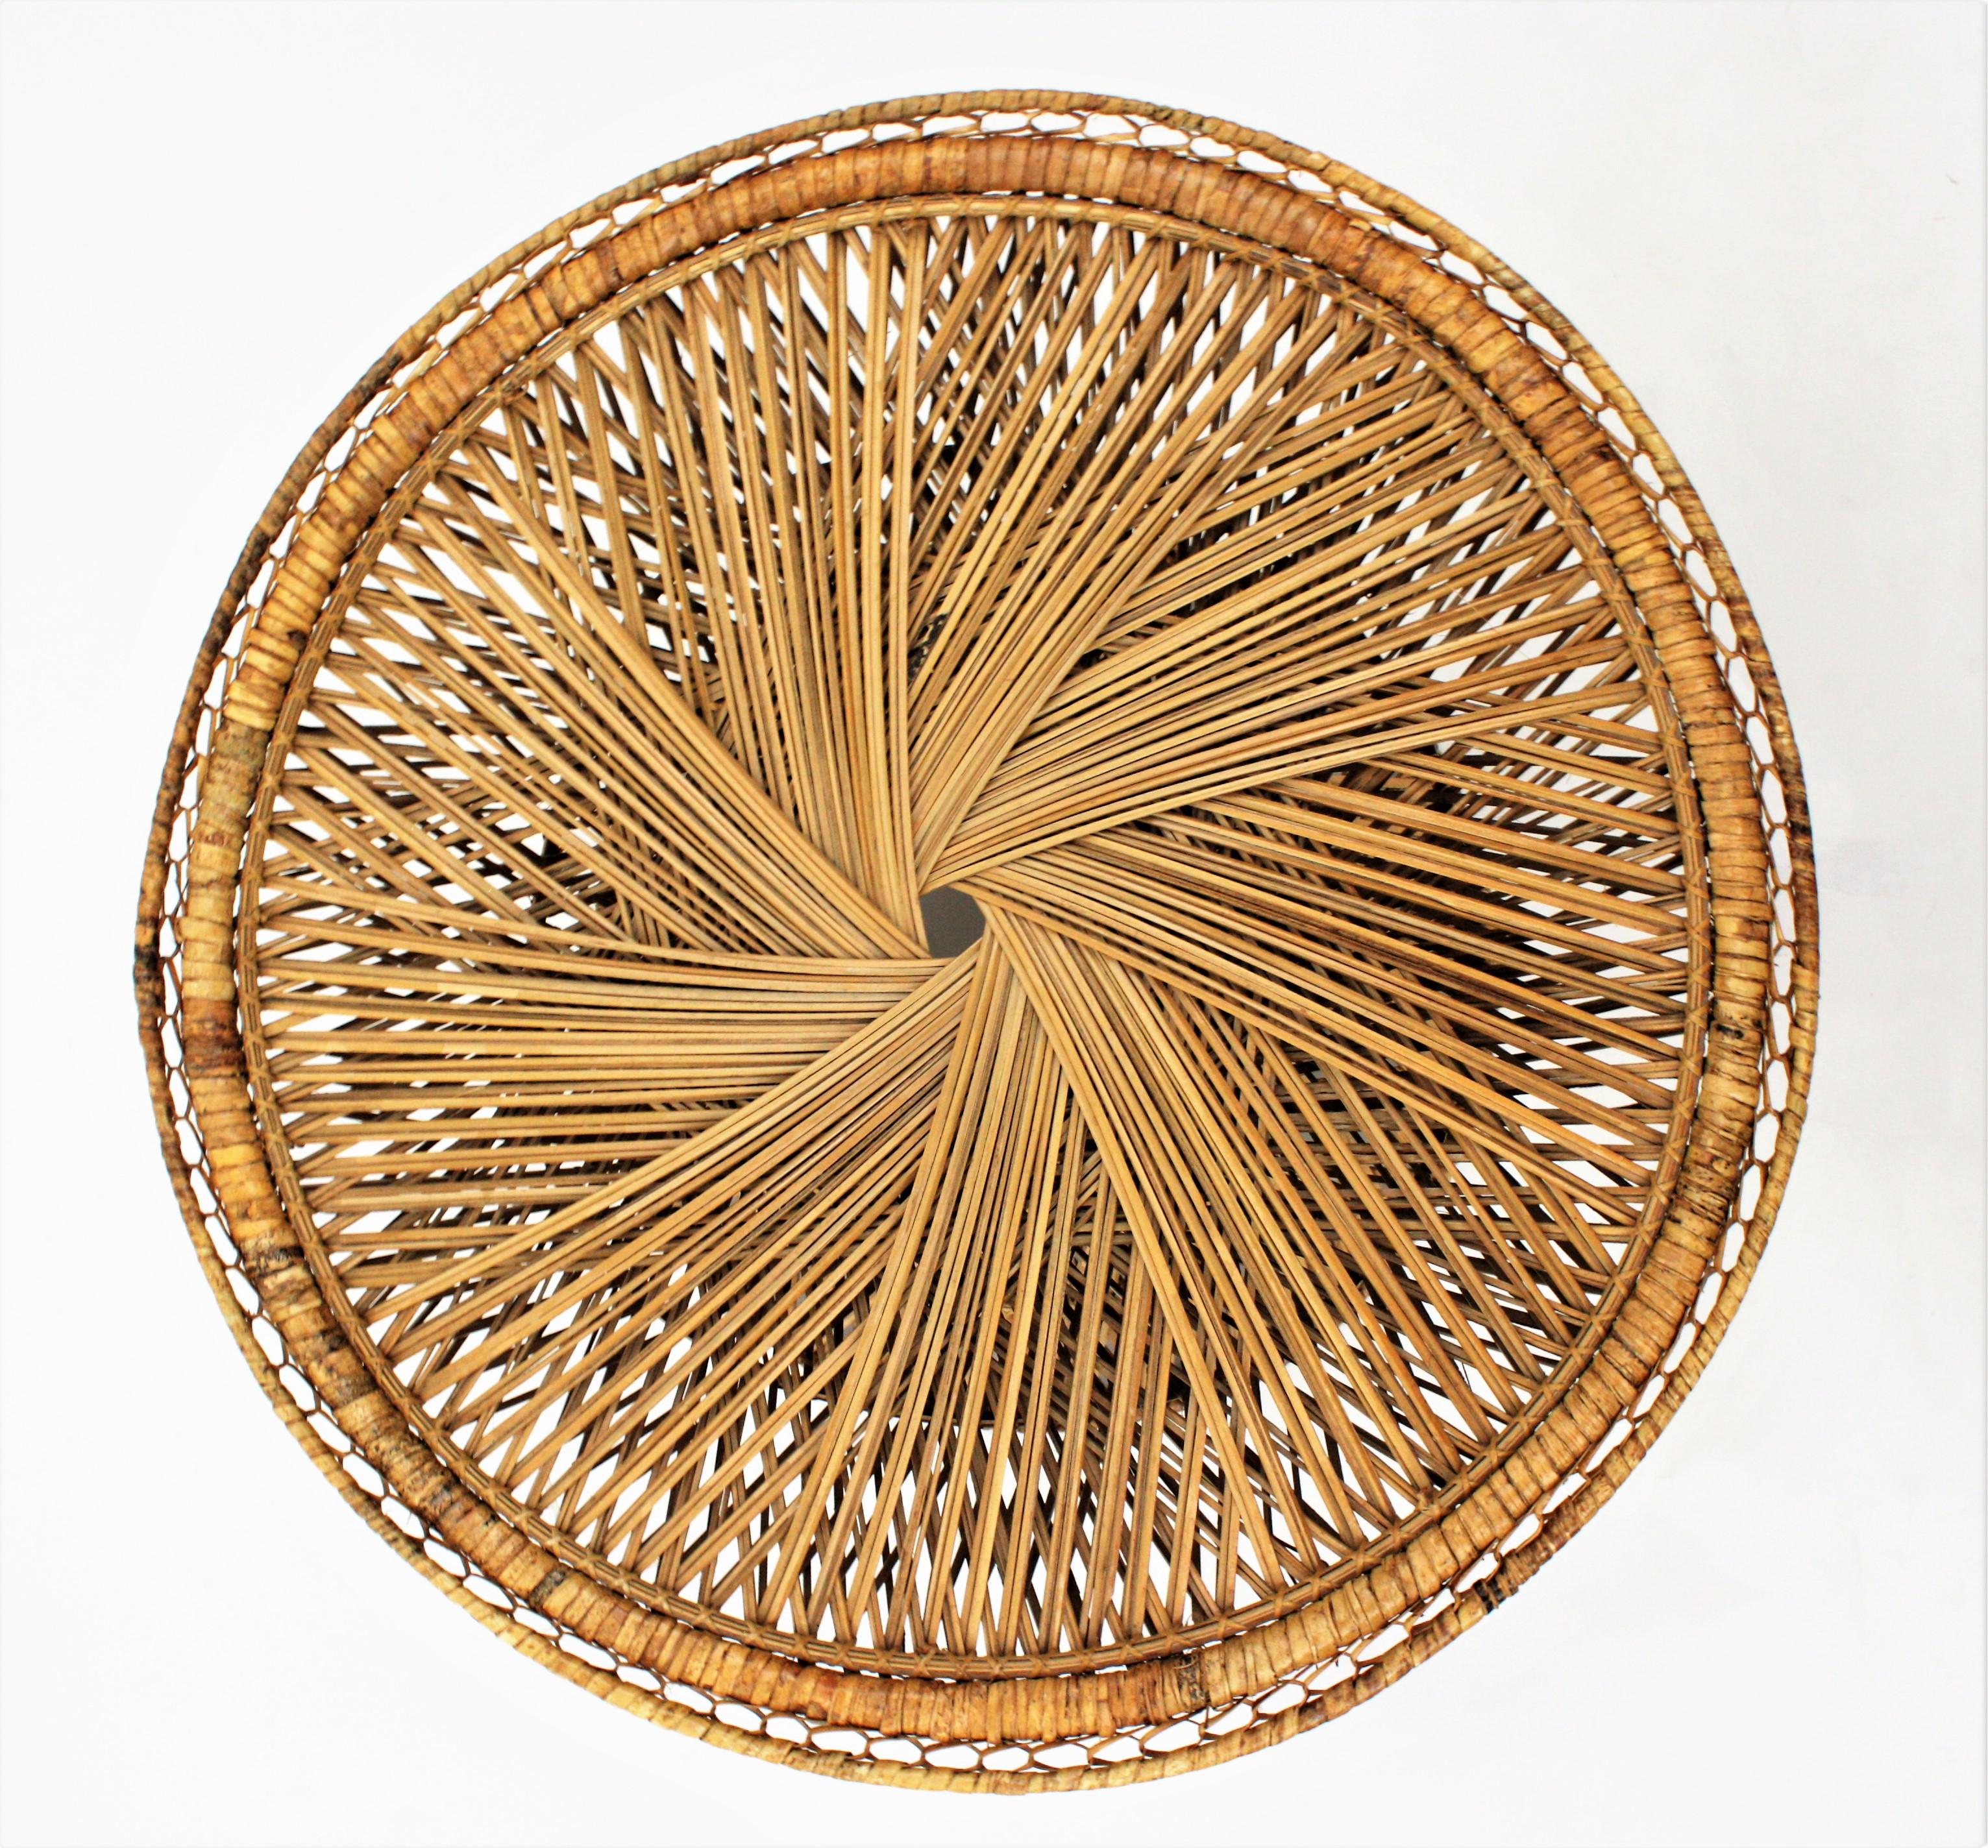 Woven Wicker and Rattan Emmanuelle Peacock Coffee Table, Spain, 1960s For Sale 2